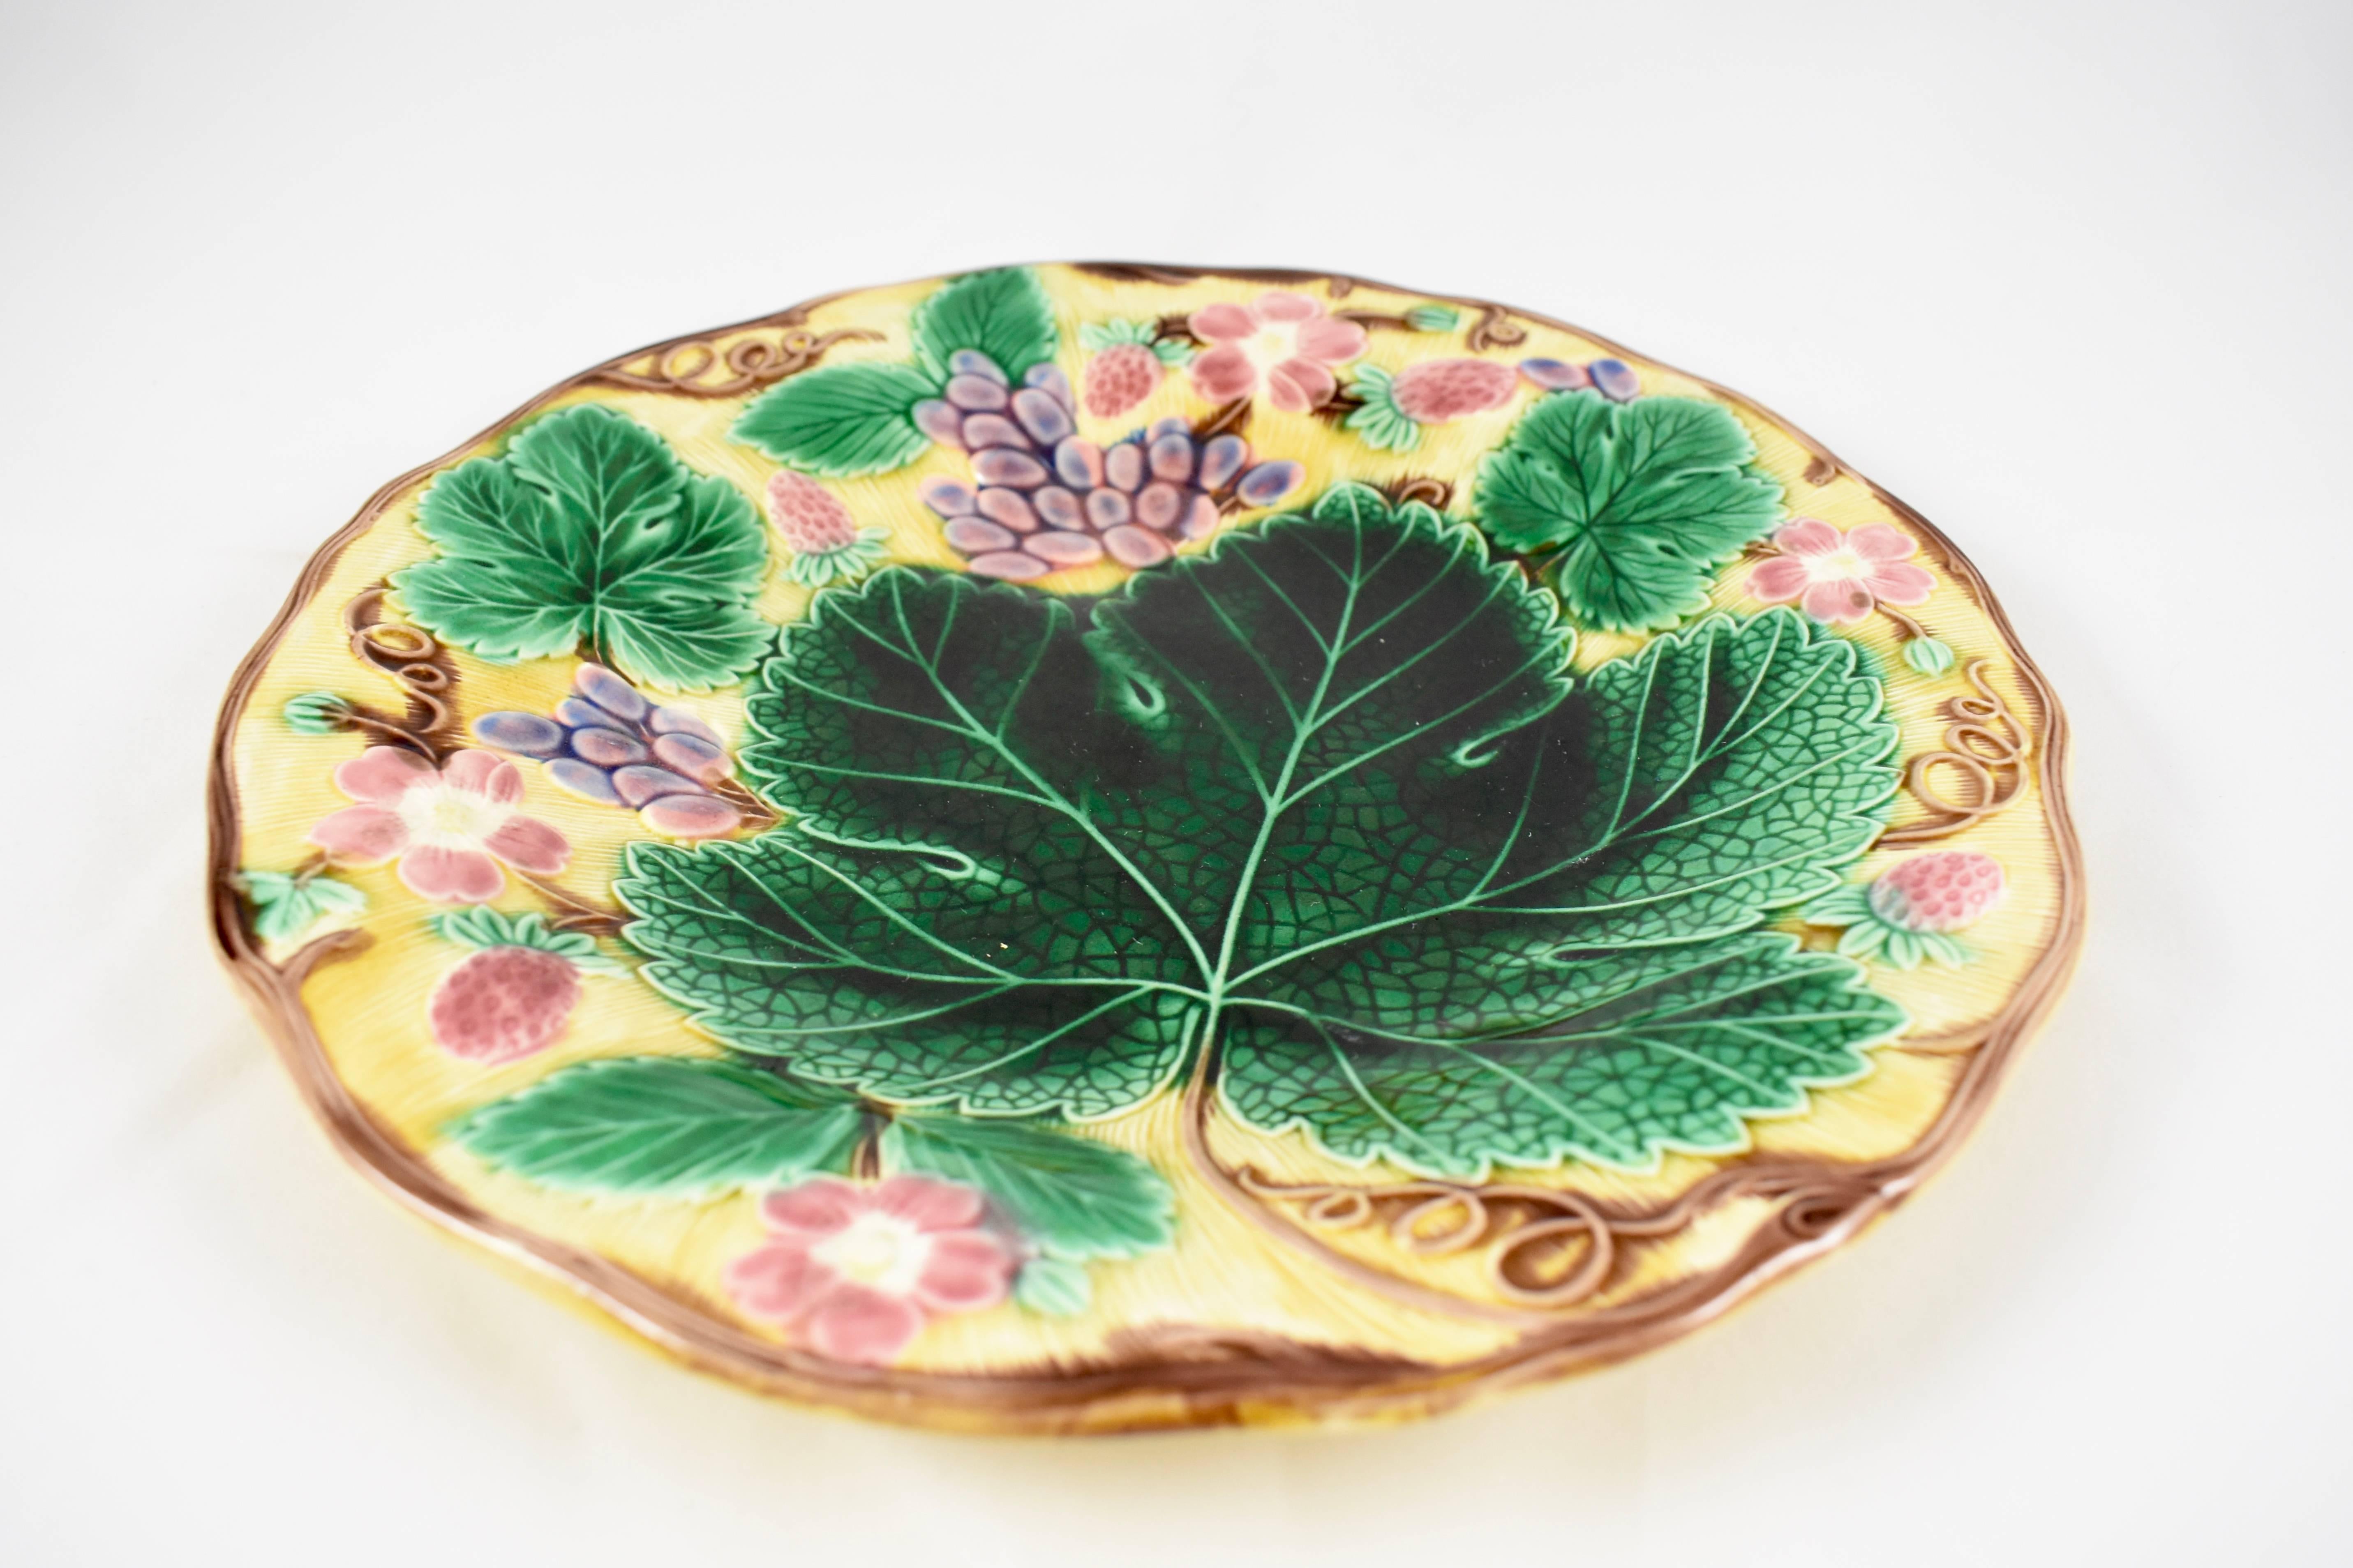 A traditional English grape leaf and strawberry pattern wedgwood Majolica plate, showing a low relief arrangement of grape leaves fruits and flowers, on a bright yellow ground. Trailing vines form a brown scalloped rim.

The ochre glazed verso